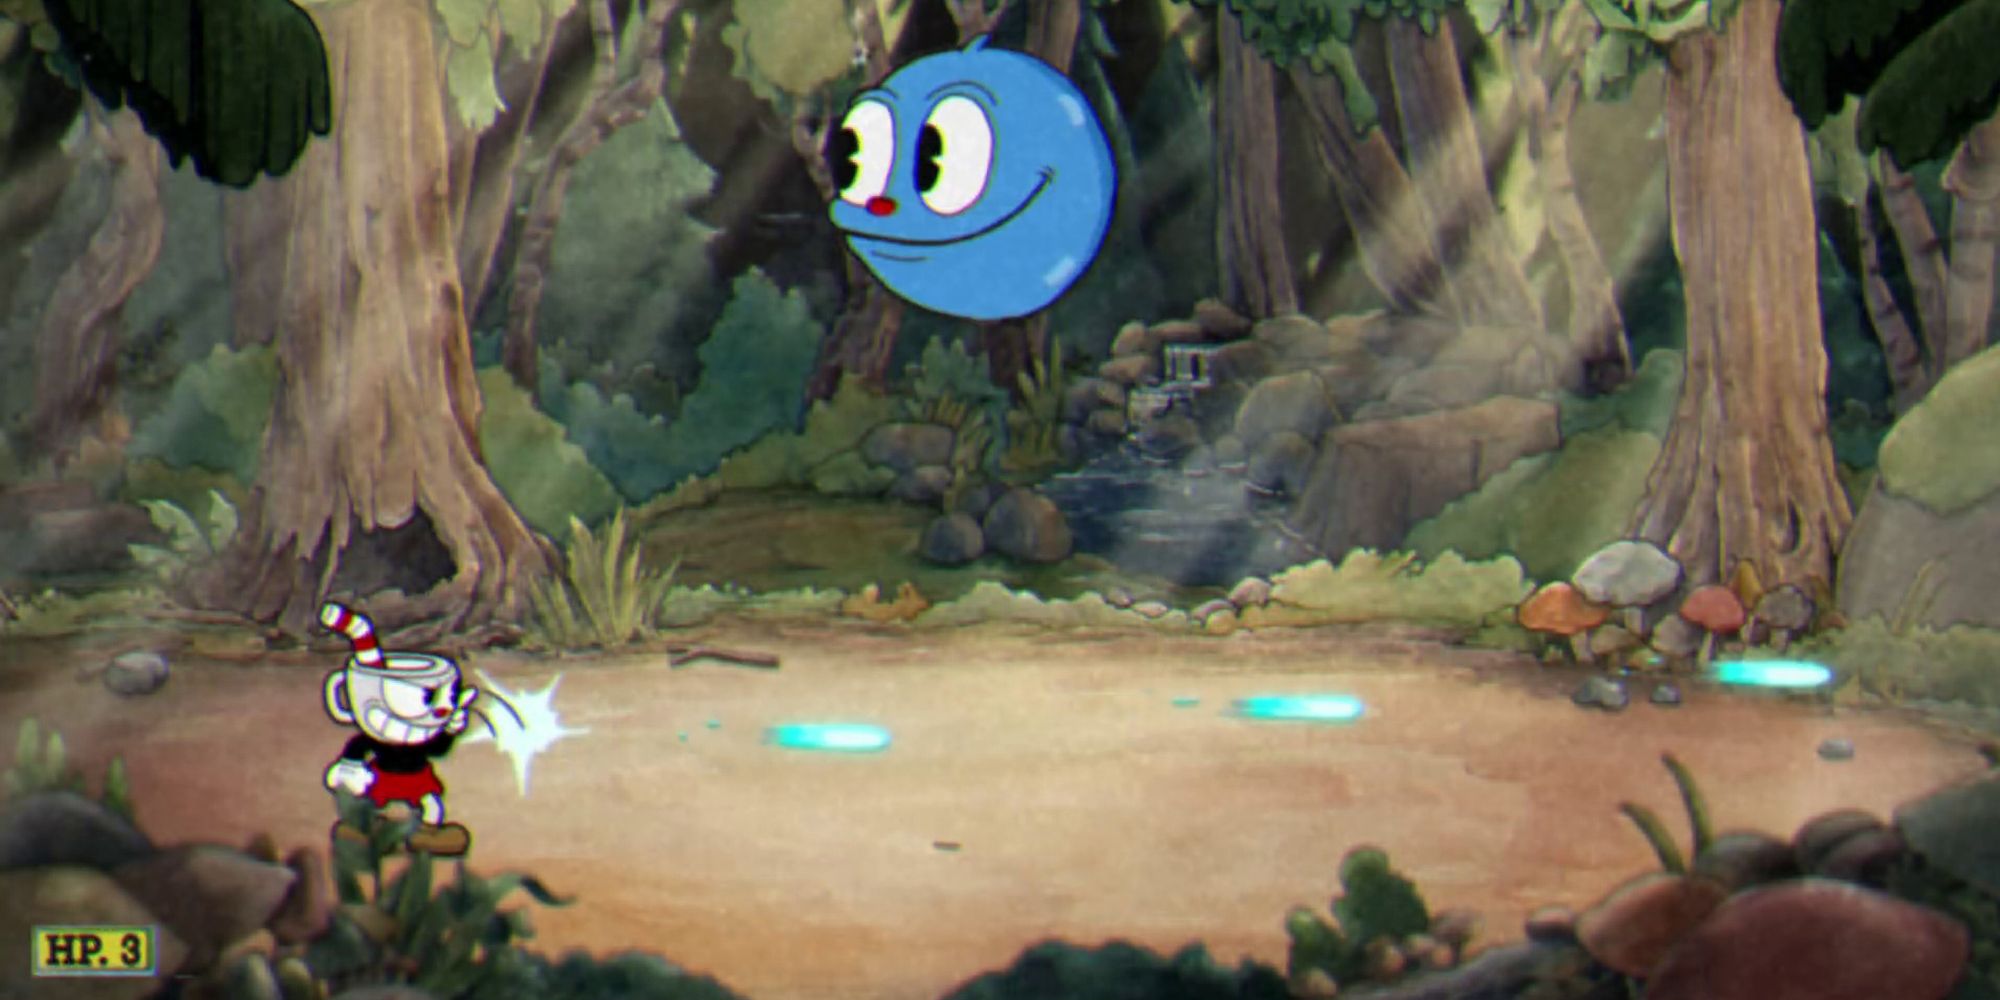 Peashooter attack against a blue blob enemy.